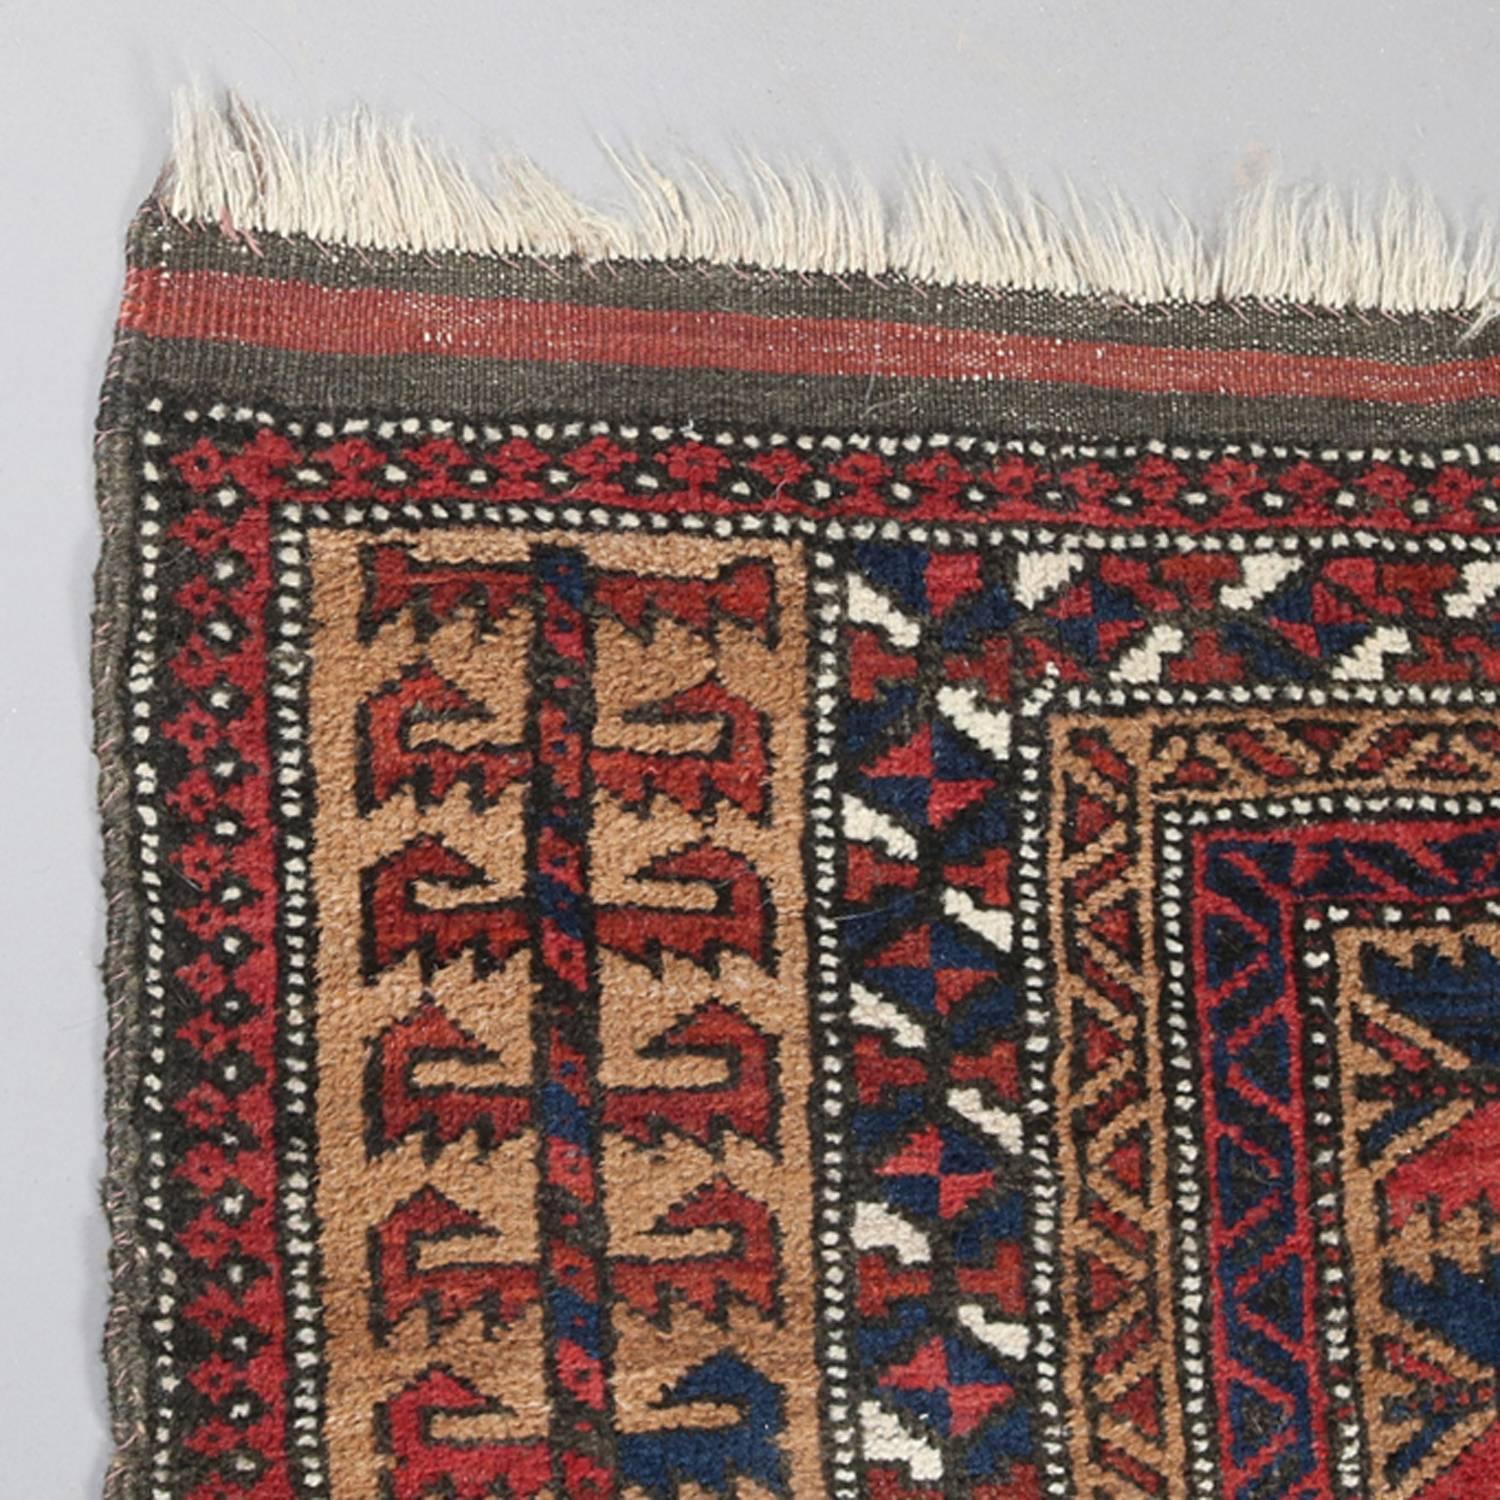 Wool Antique Hand-Knotted Persian Baluch Prayer Rug, 1900